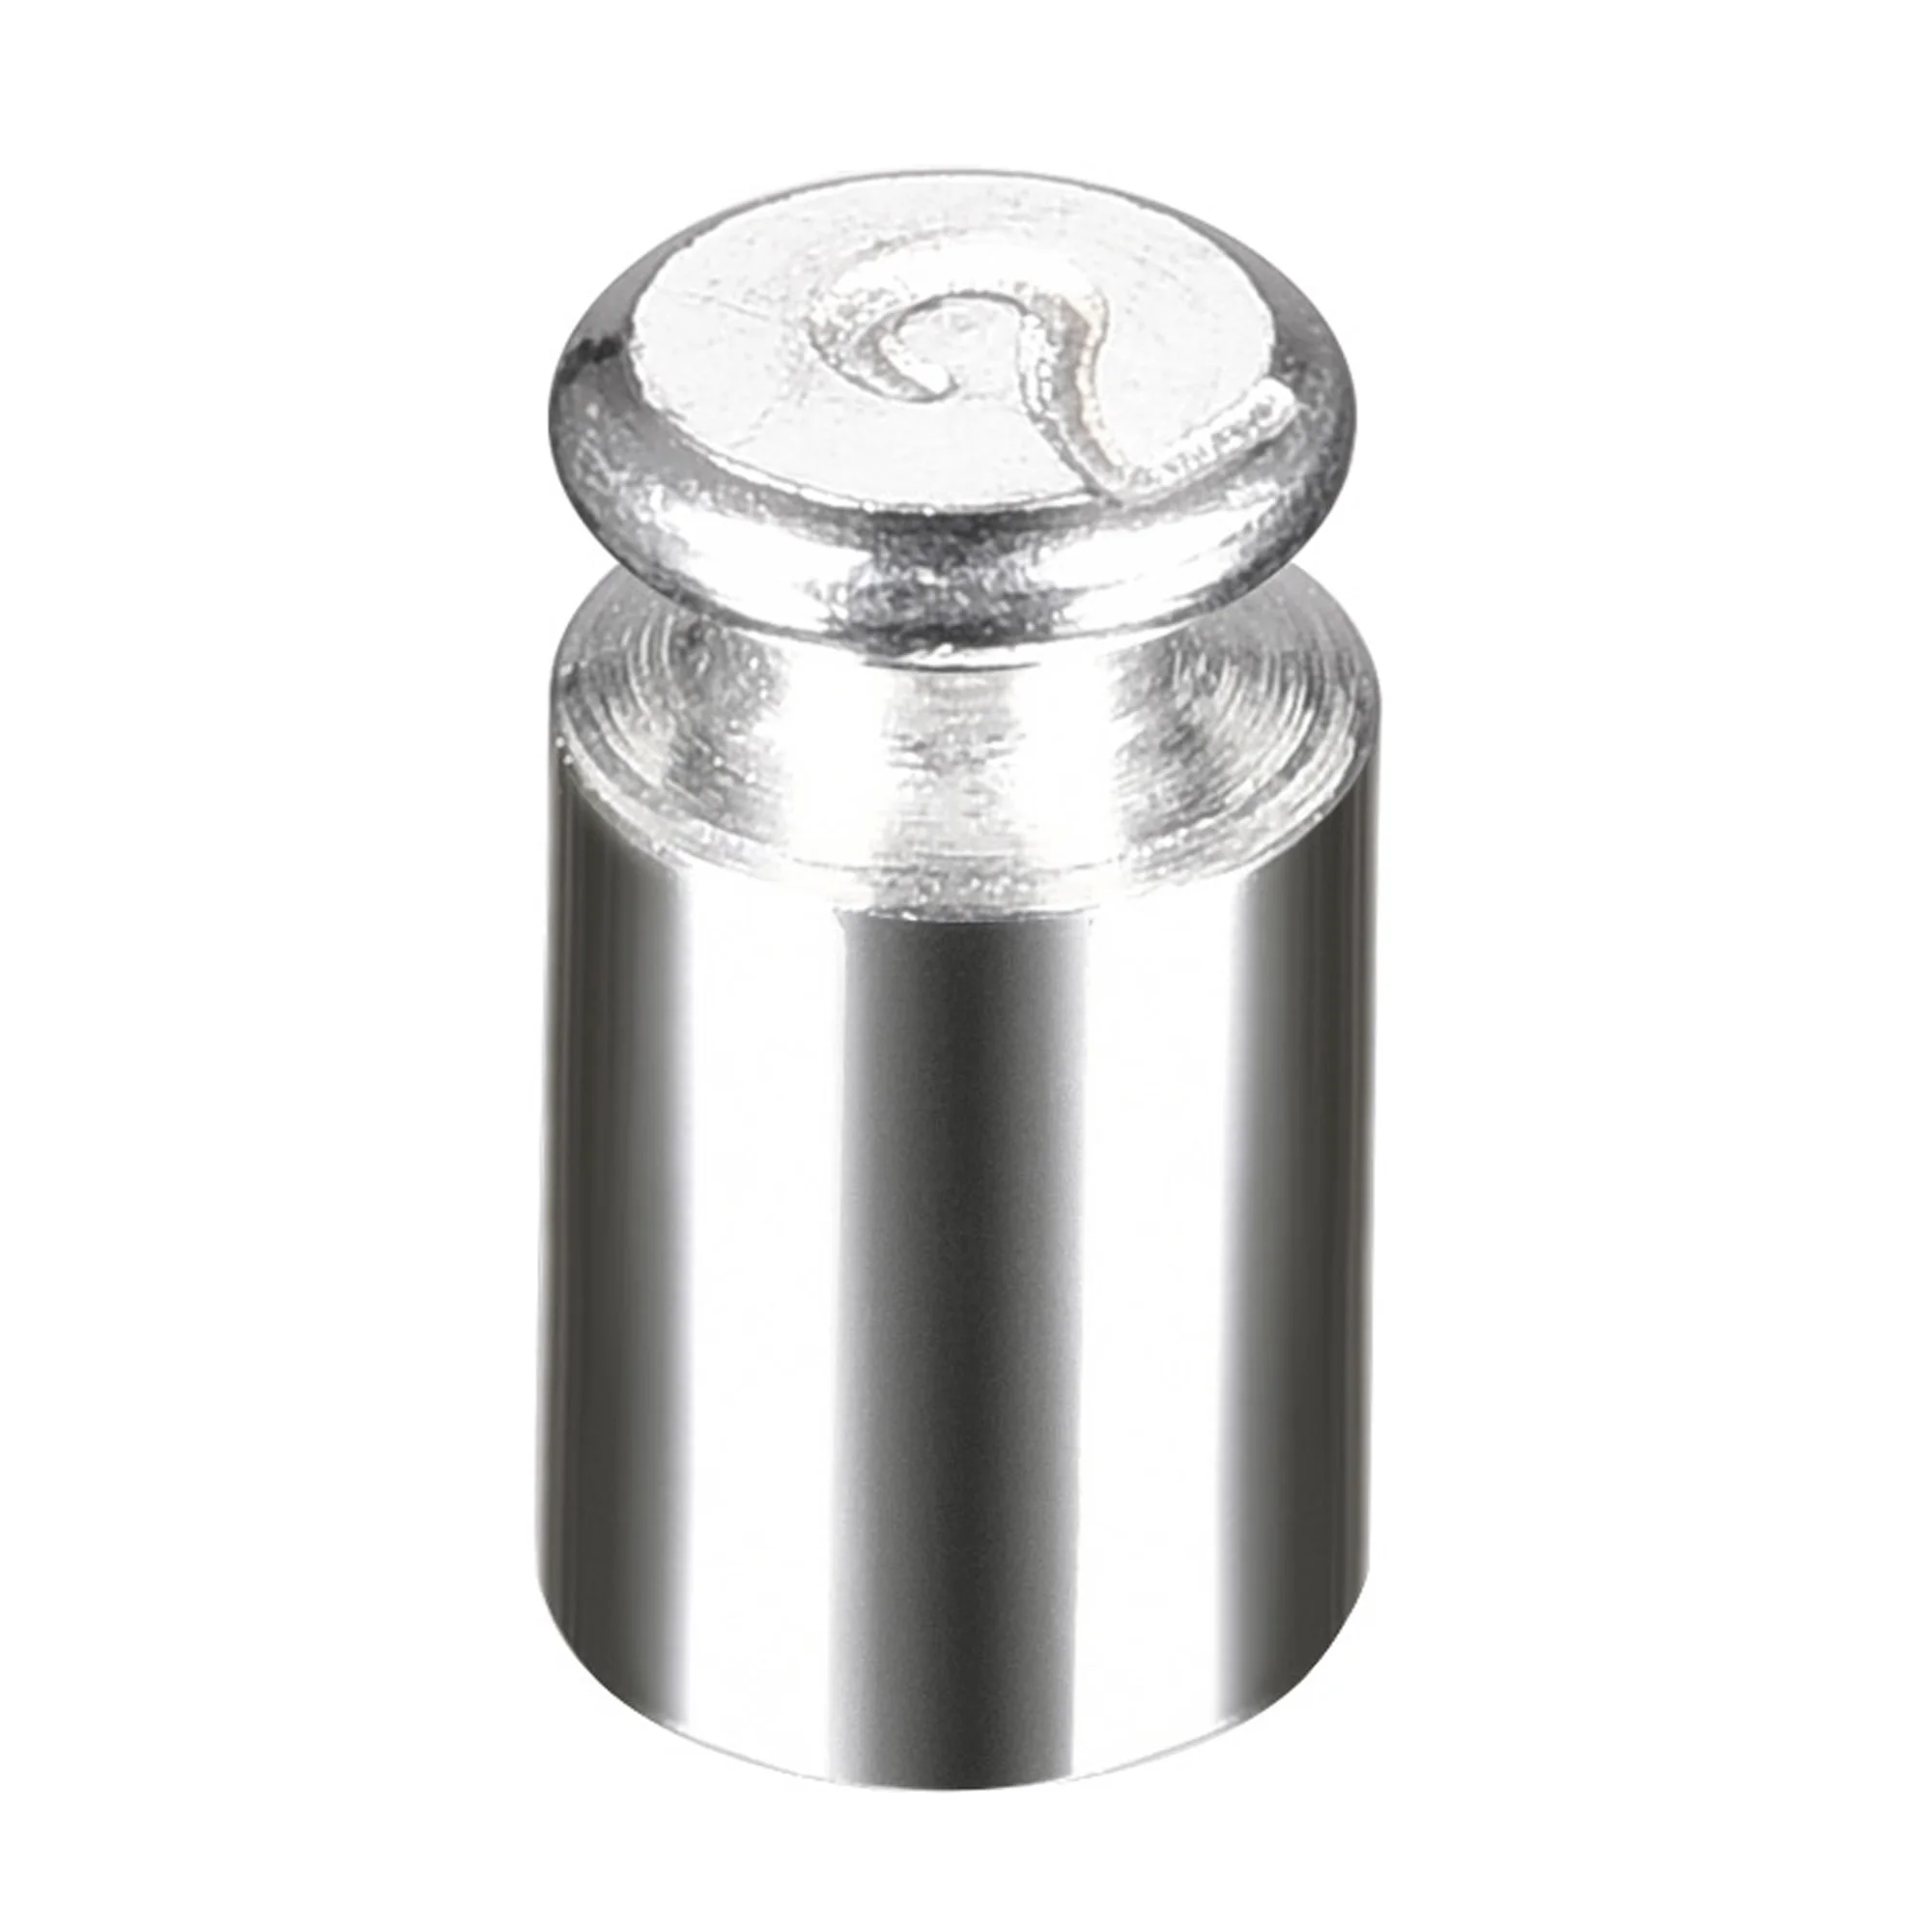 

uxcell Gram Calibration Weight 2g M2 Precision Chrome Plated Steel for Digital Balance Scale